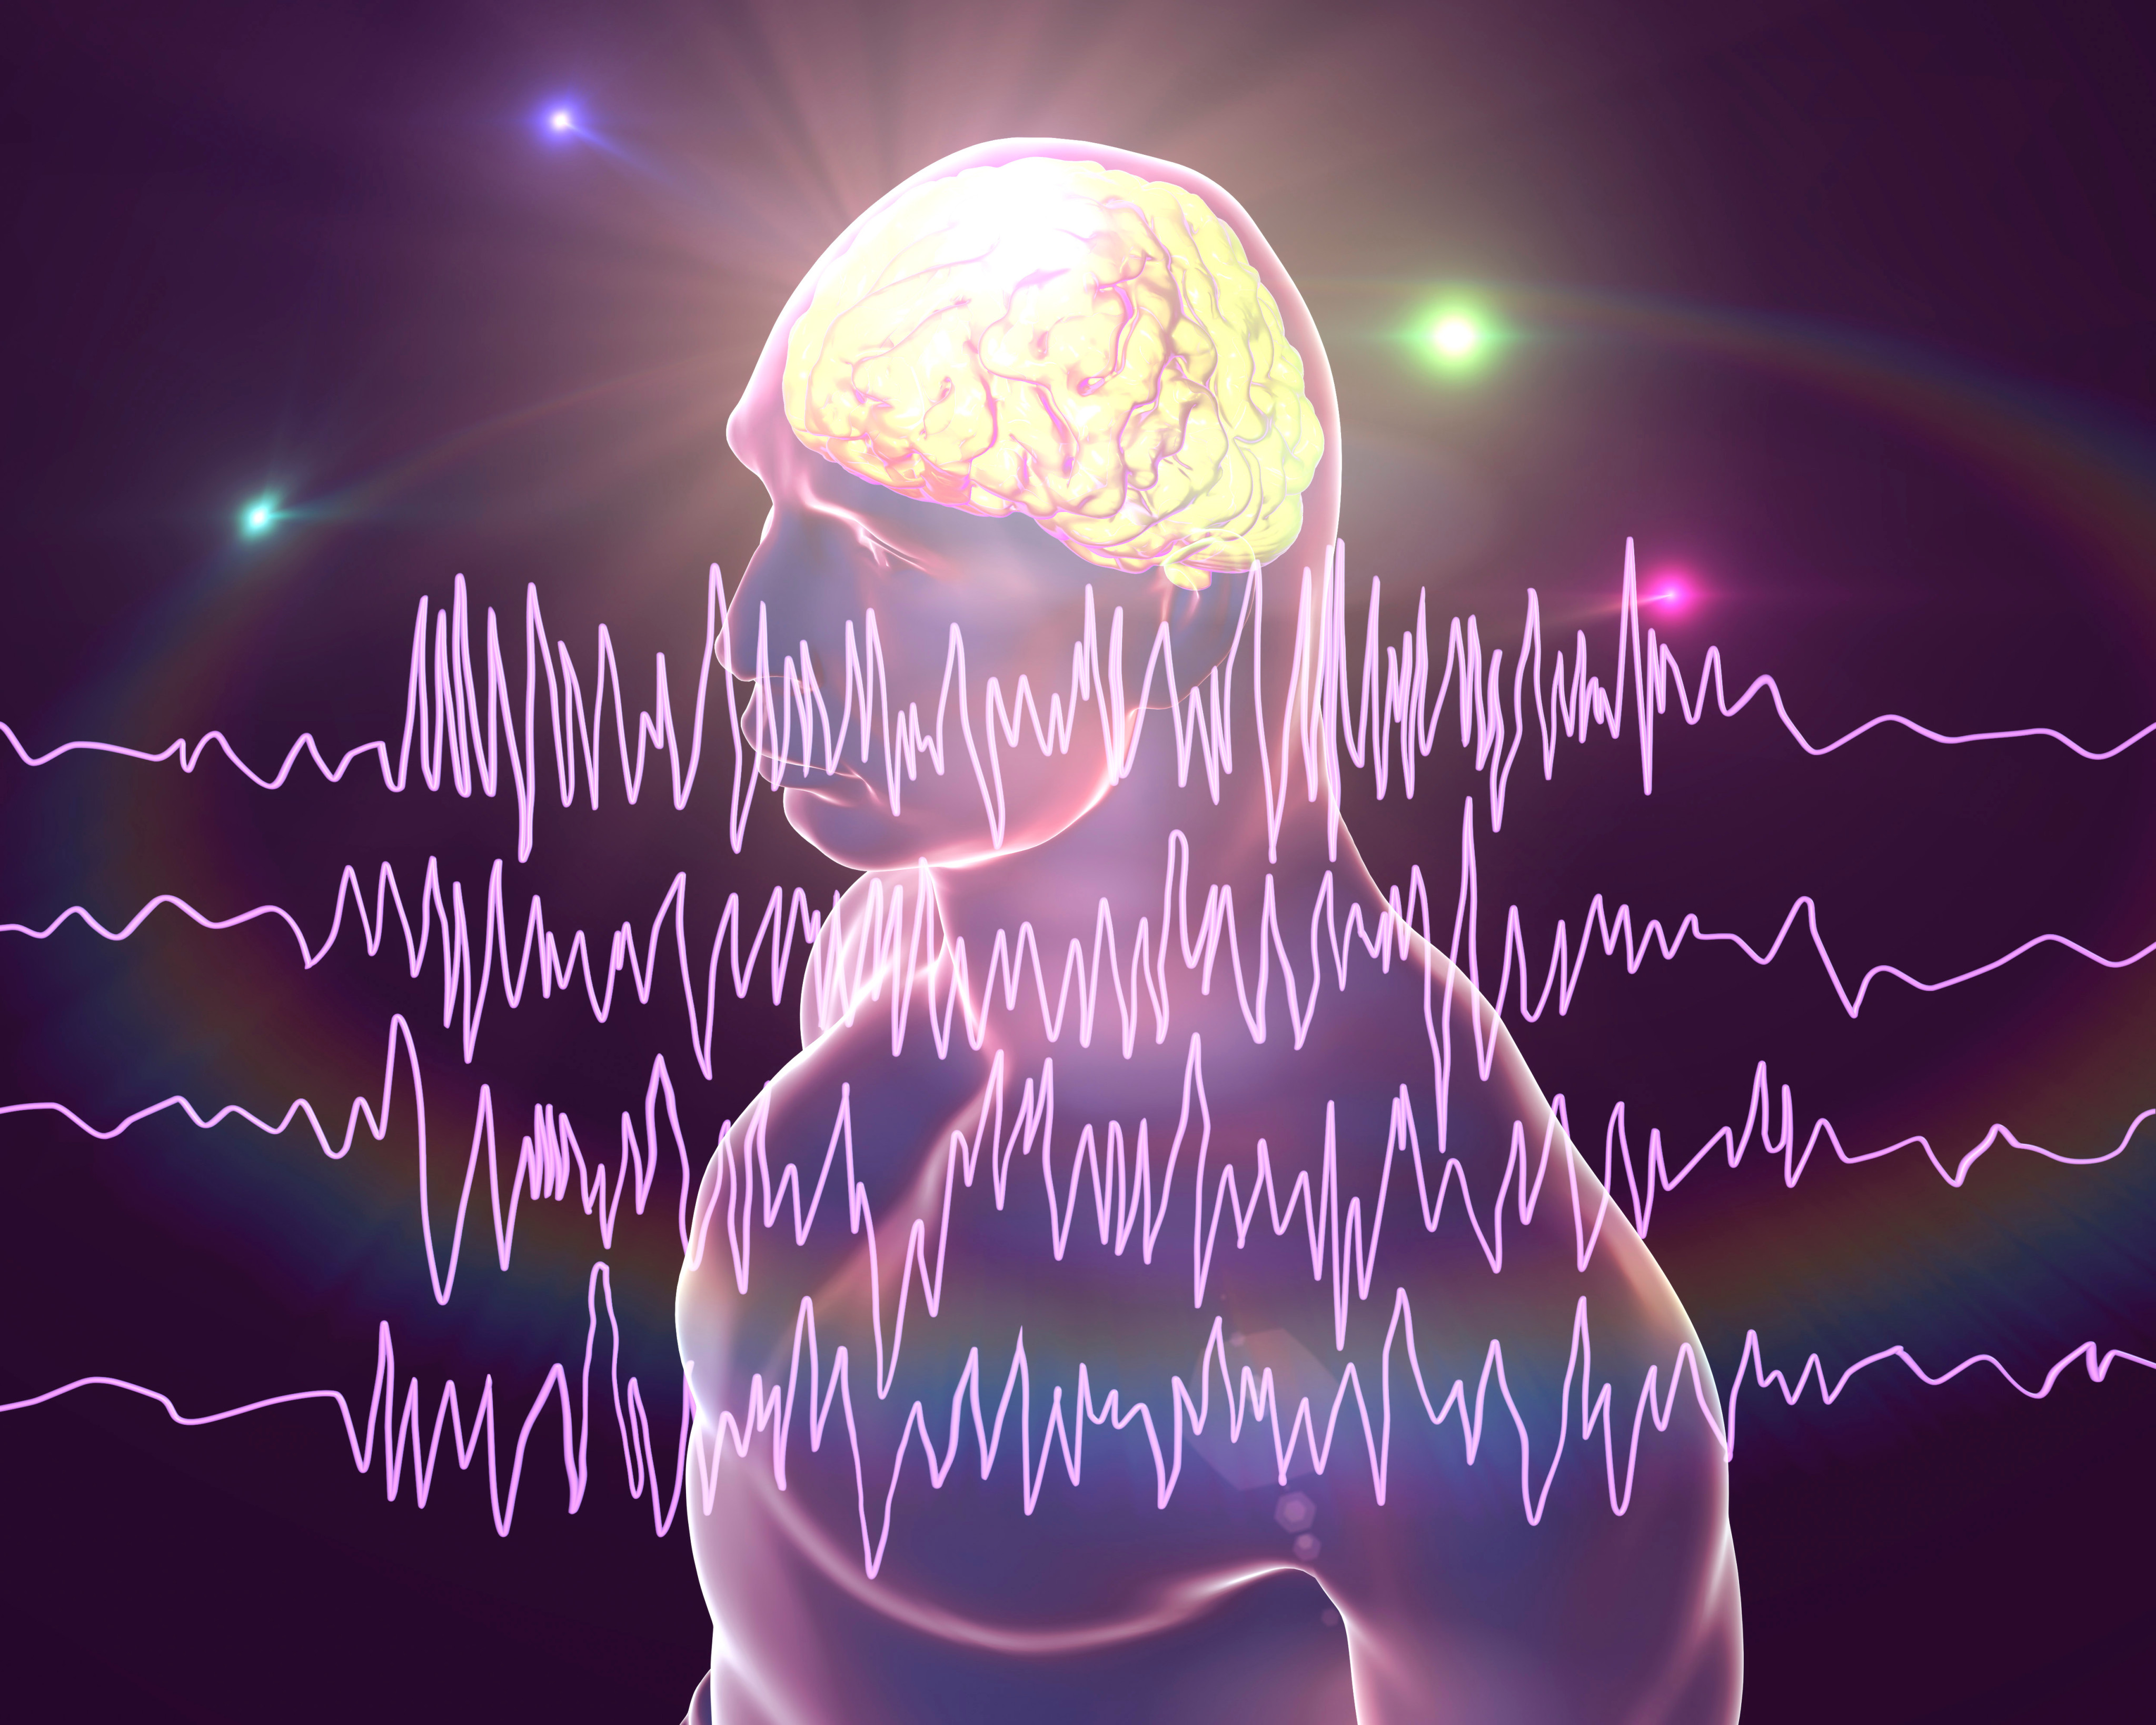 One in 10 people have at least one seizure in their lifetime. A research team in Hong Kong has found a new way to treat one of the most common forms of epilepsy, and shown it works in mice. Photo: Shutterstock